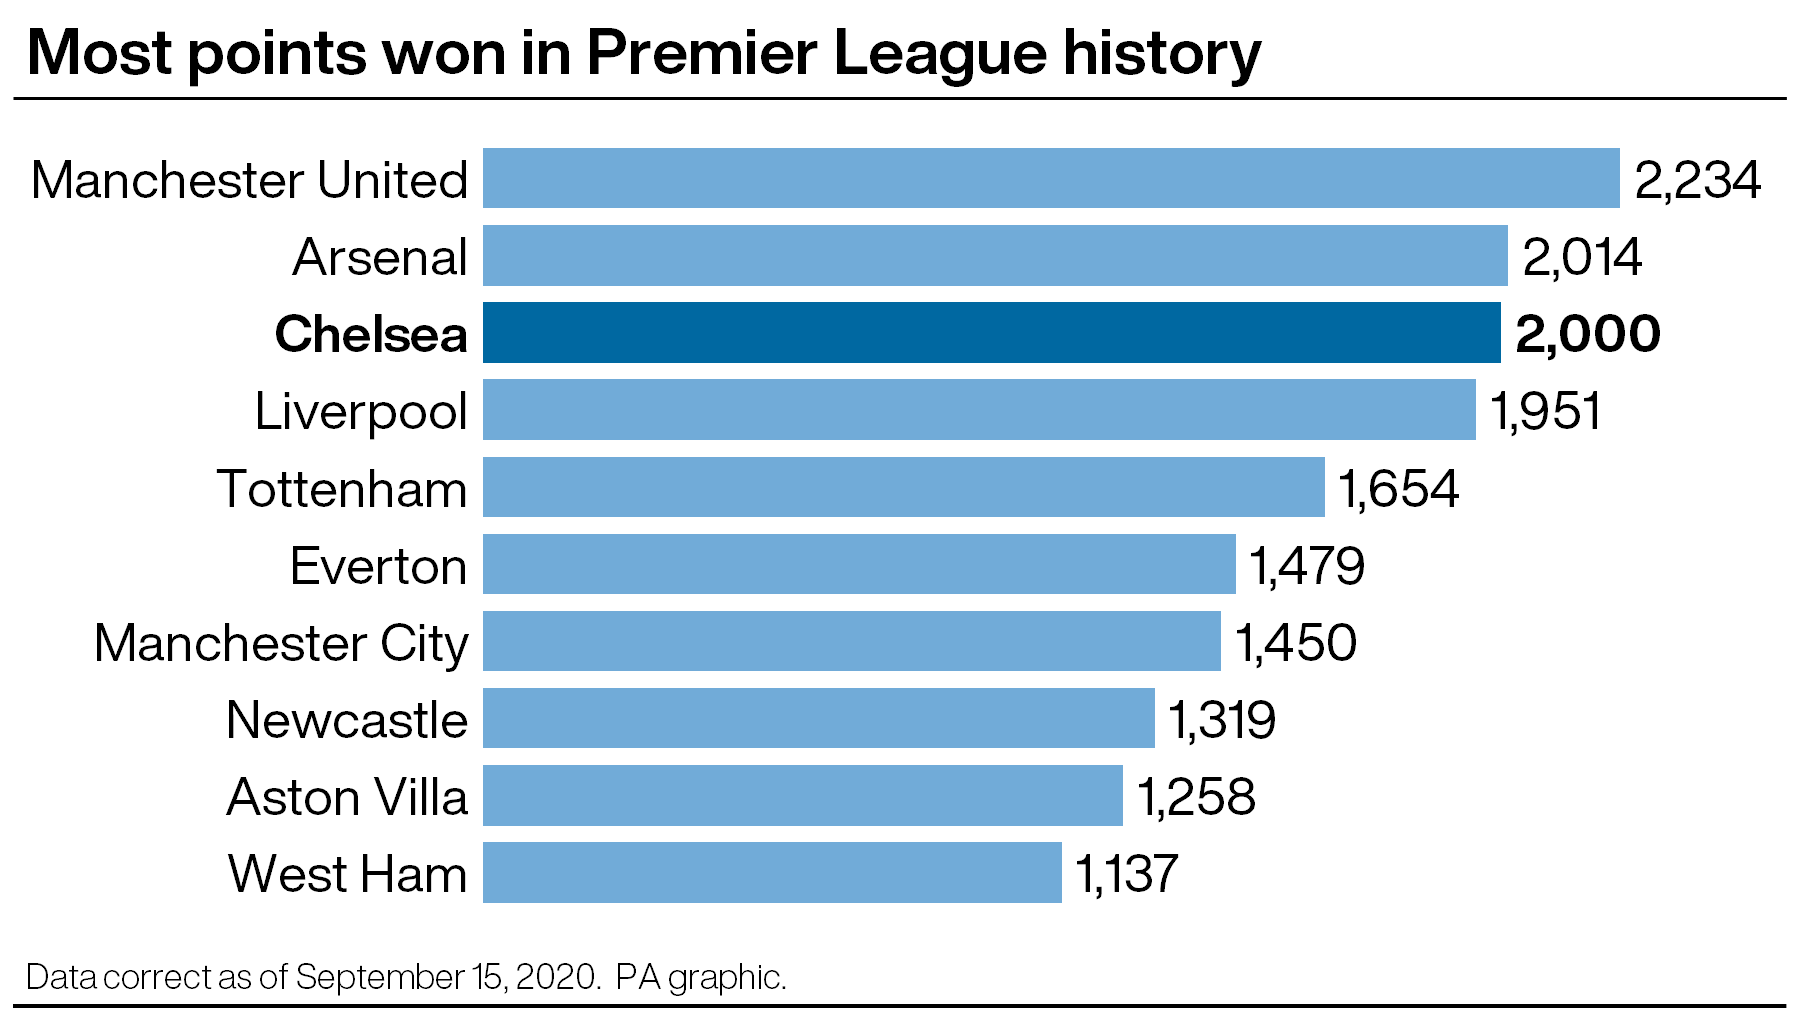 Most points in Premier League history